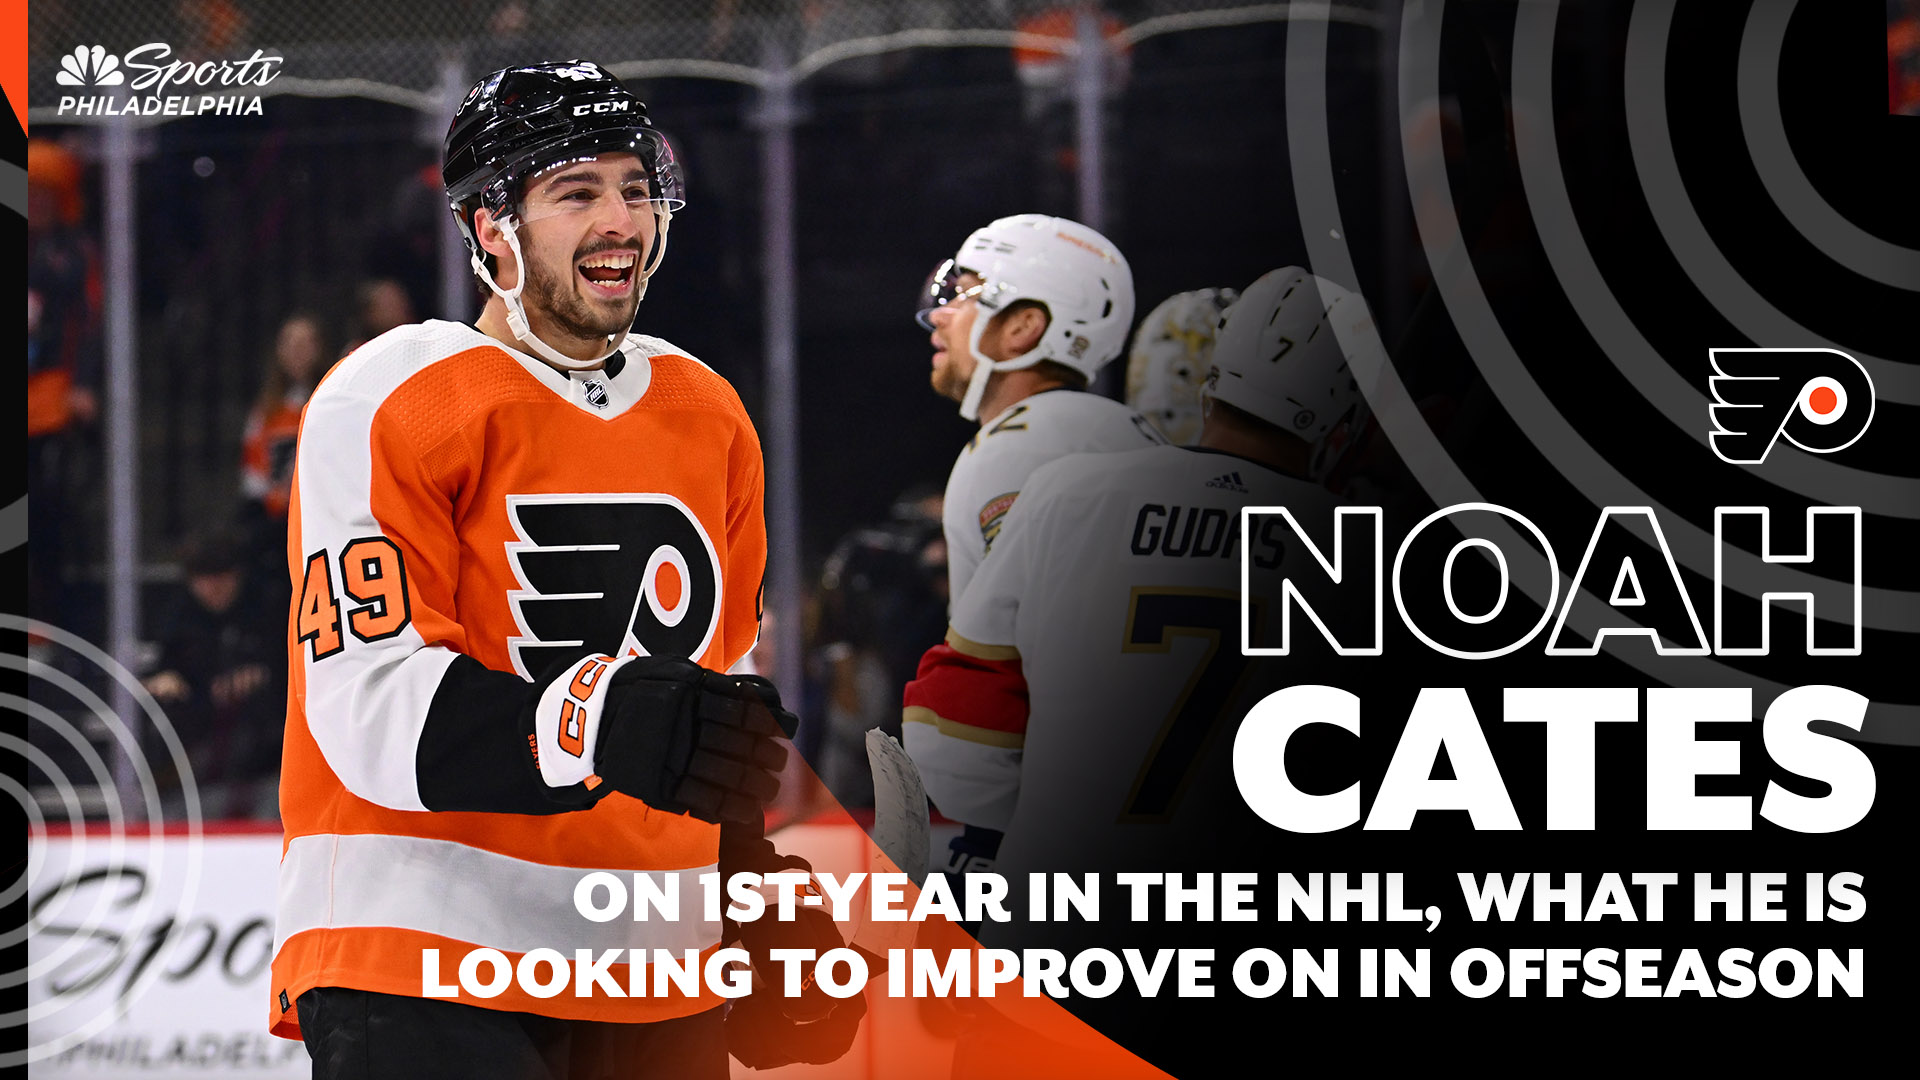 Flyers Noah Cates on his 1st full year in NHL, Sean Couturiers guidance